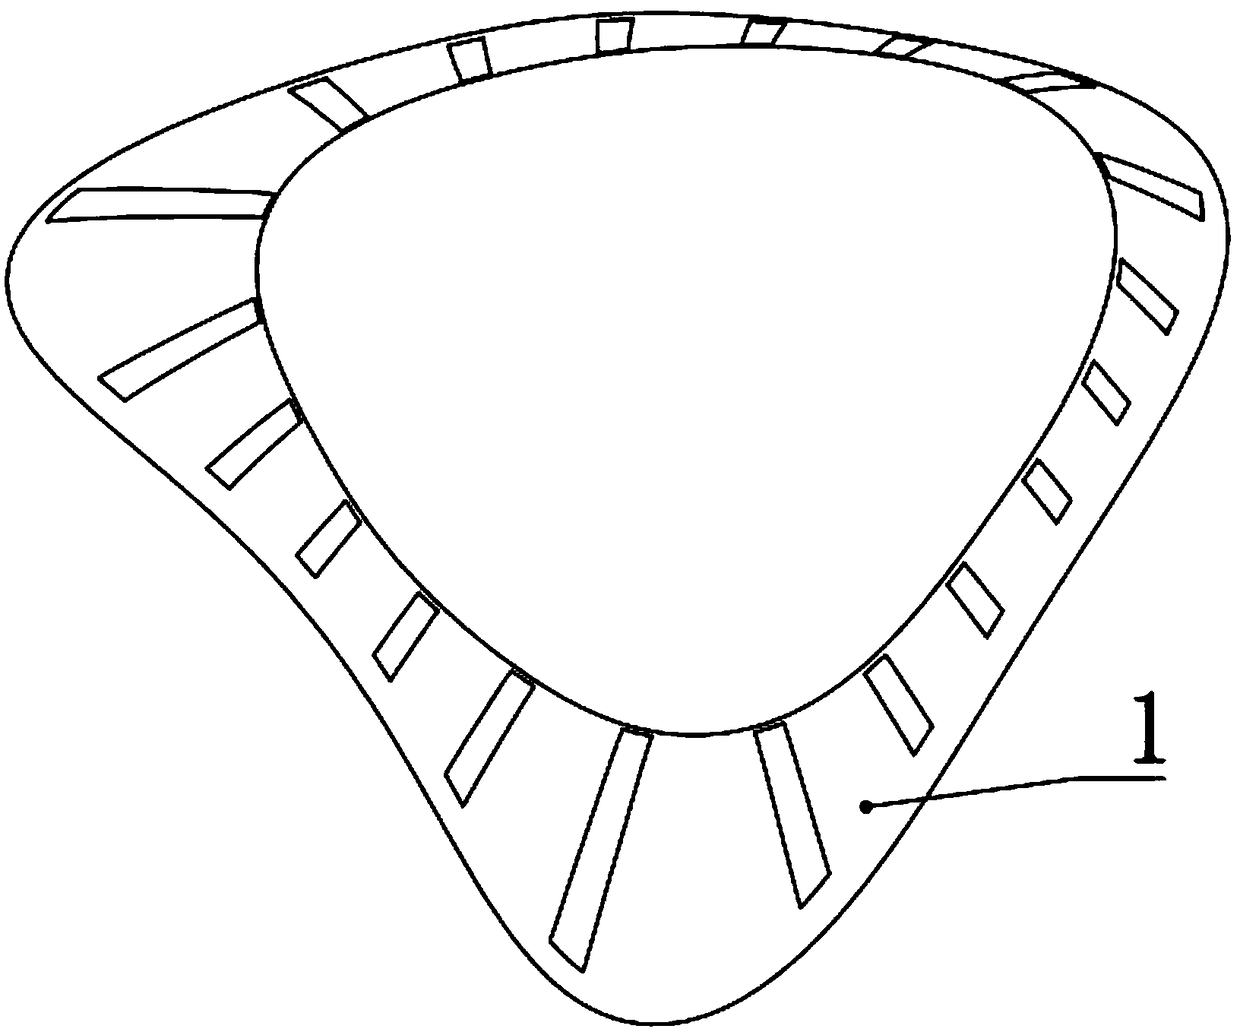 Head protection device of venous indwelling needle for infants